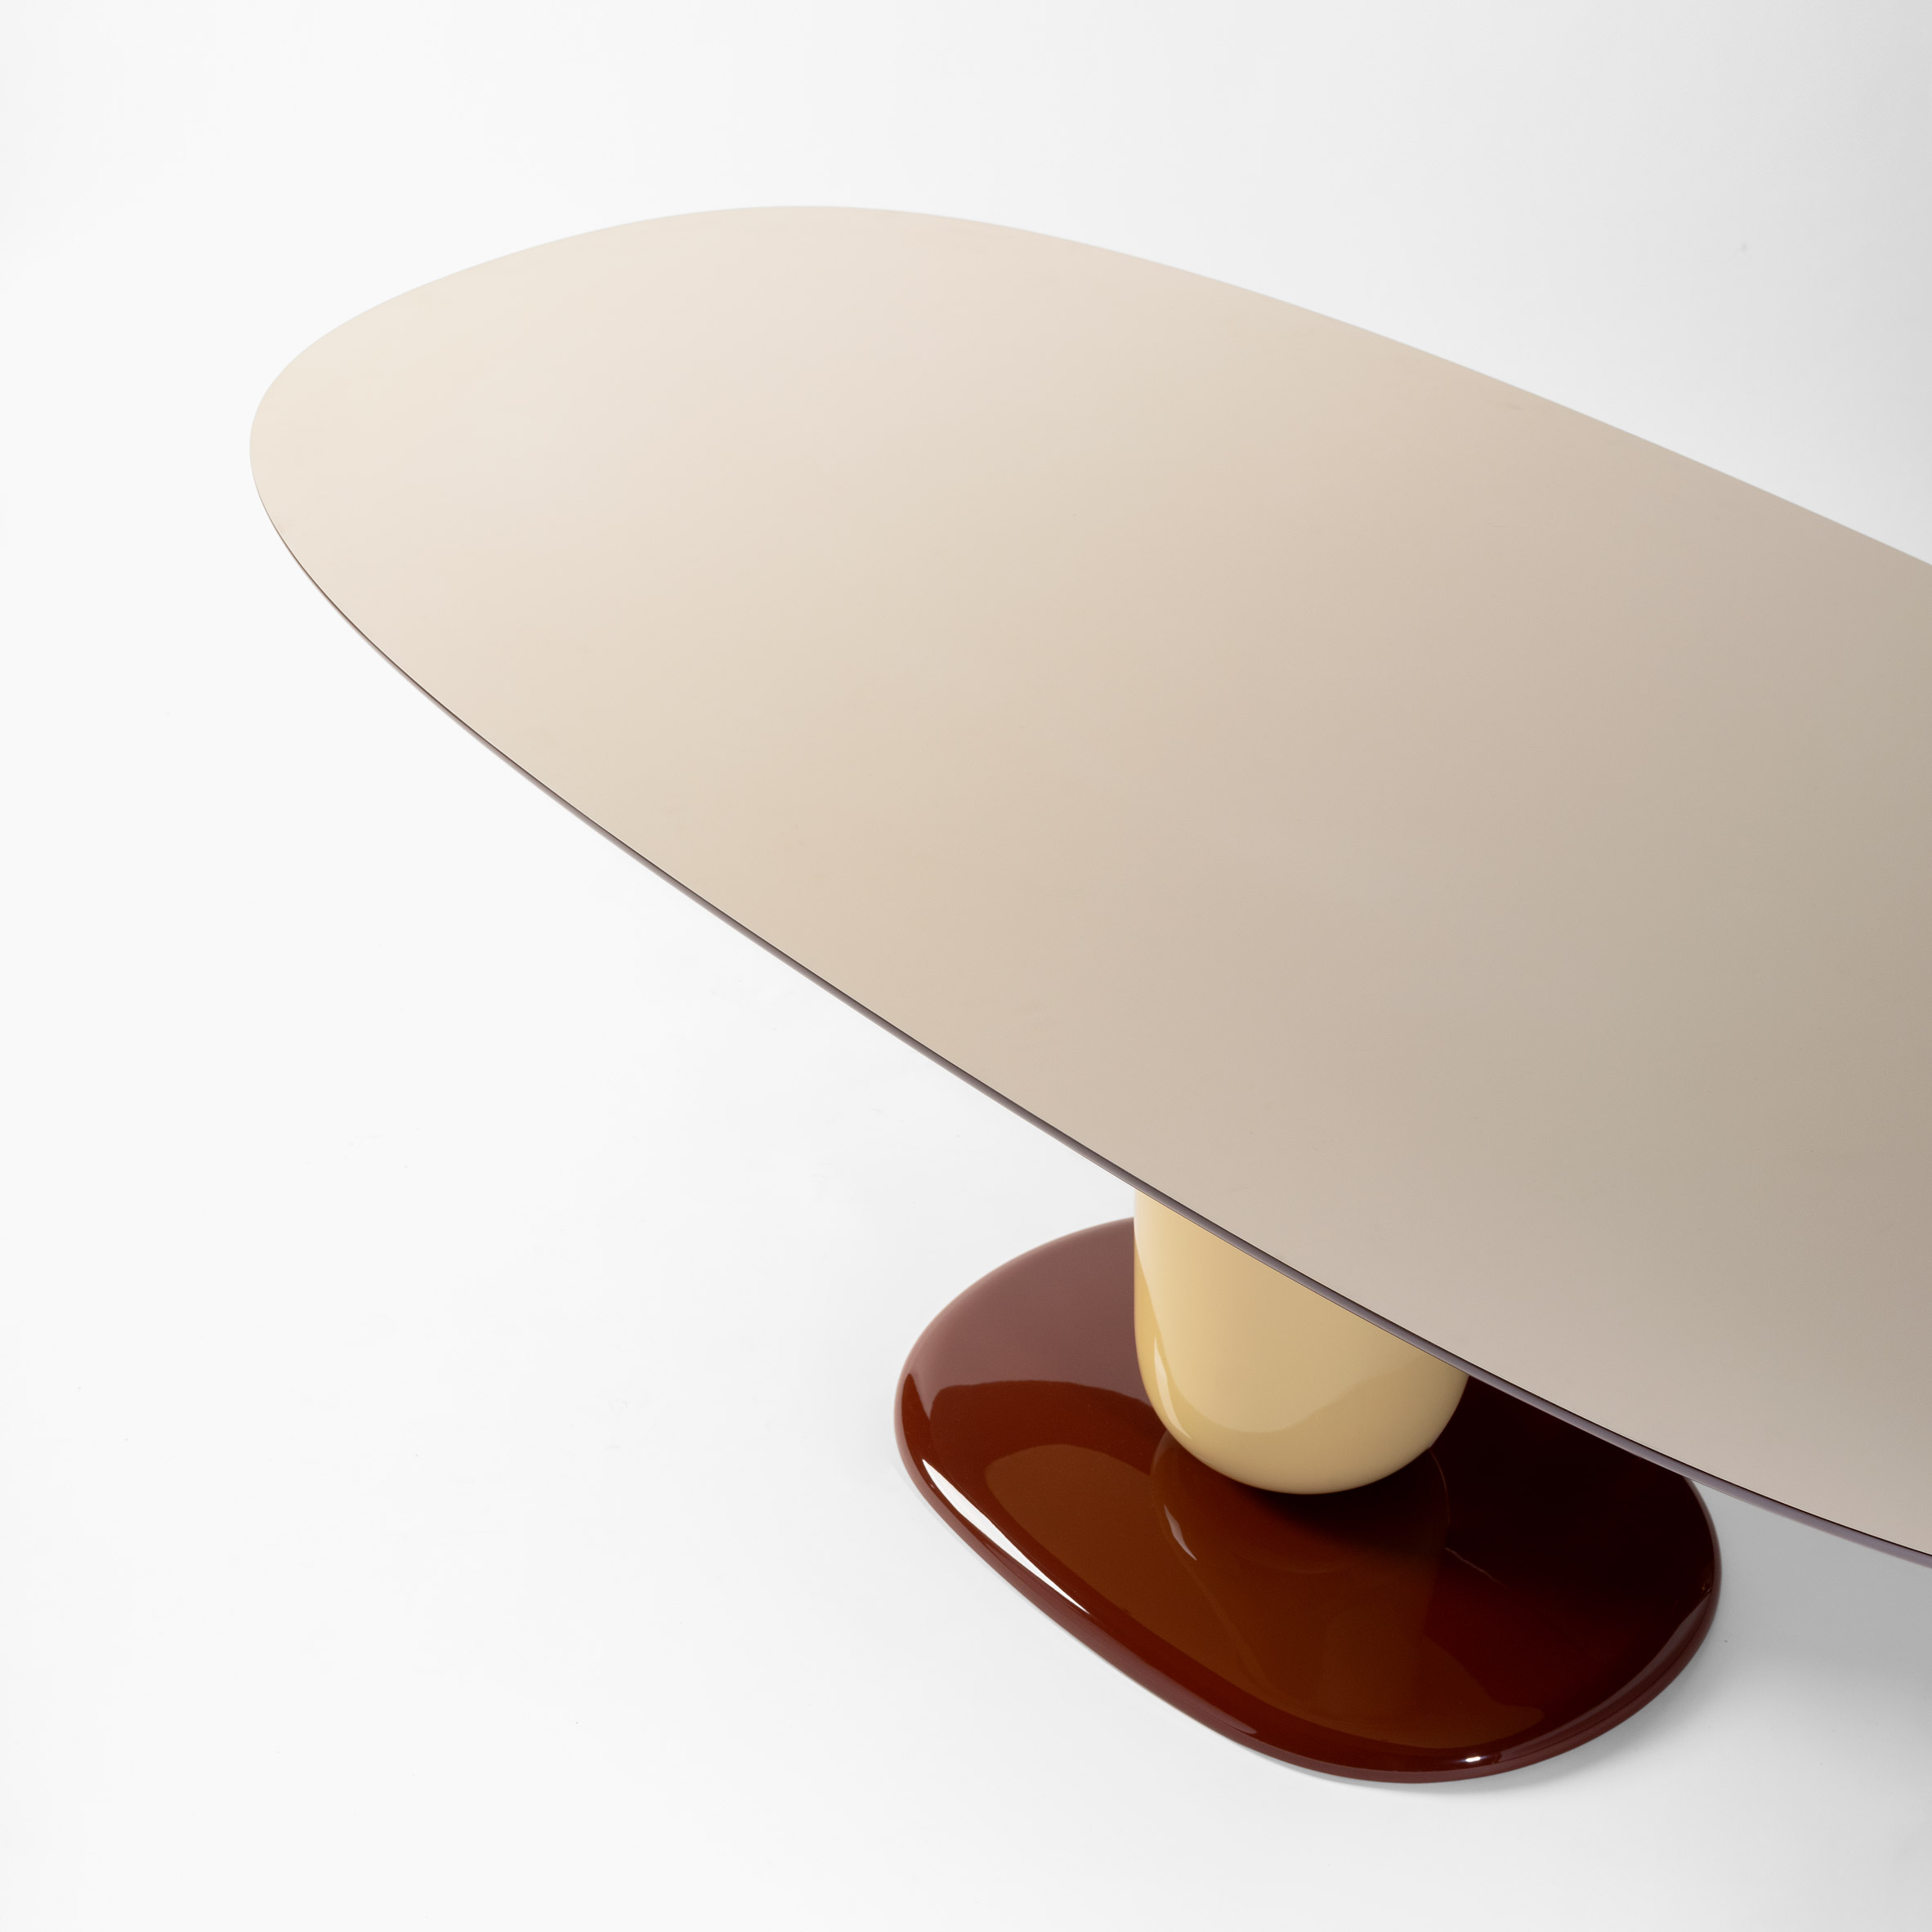 The oval-shaped tabletop of the Explorer dining table